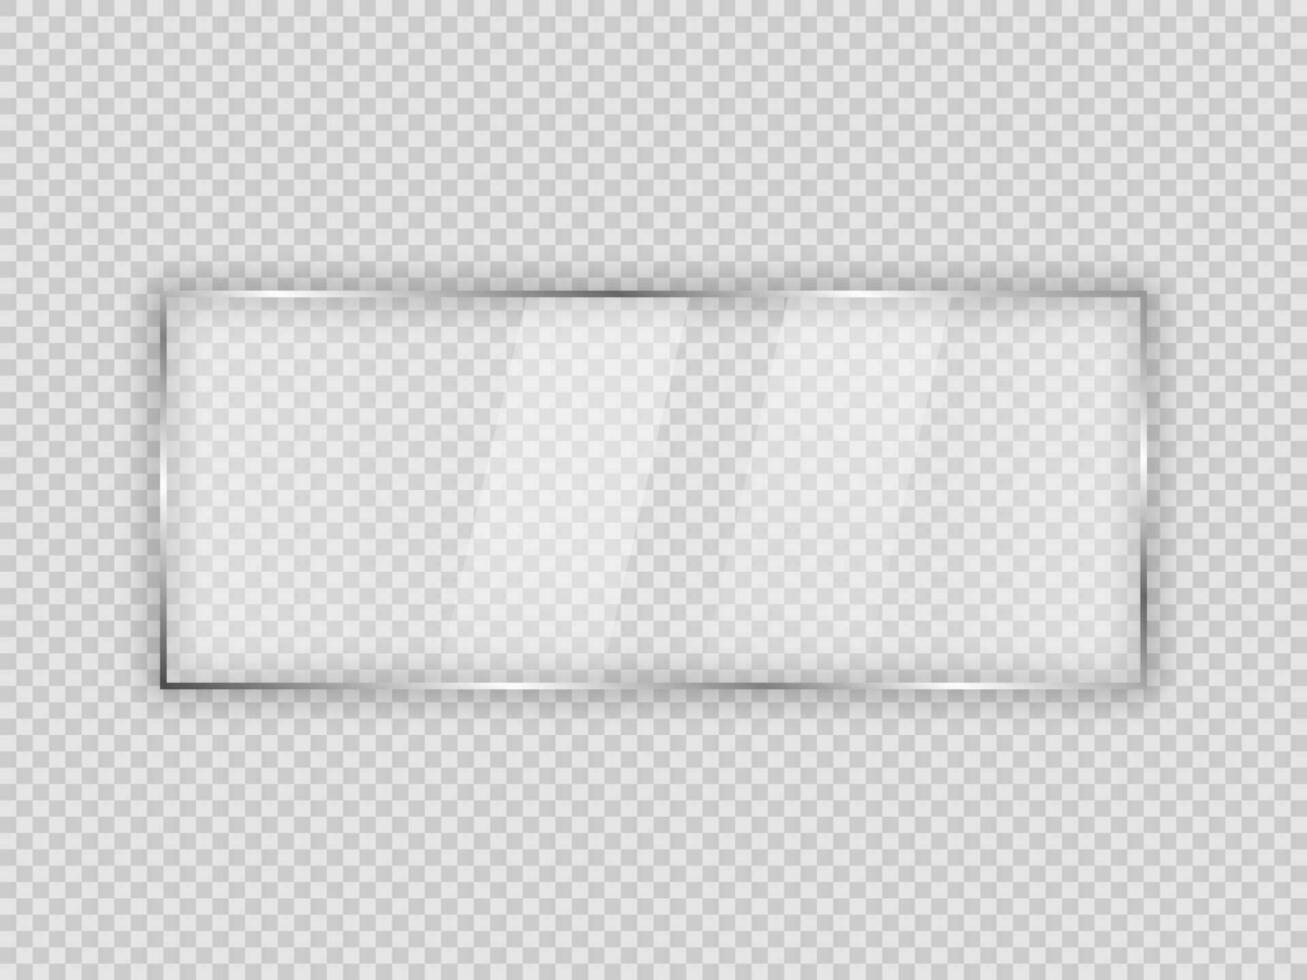 Glass plate in rectangle frame vector